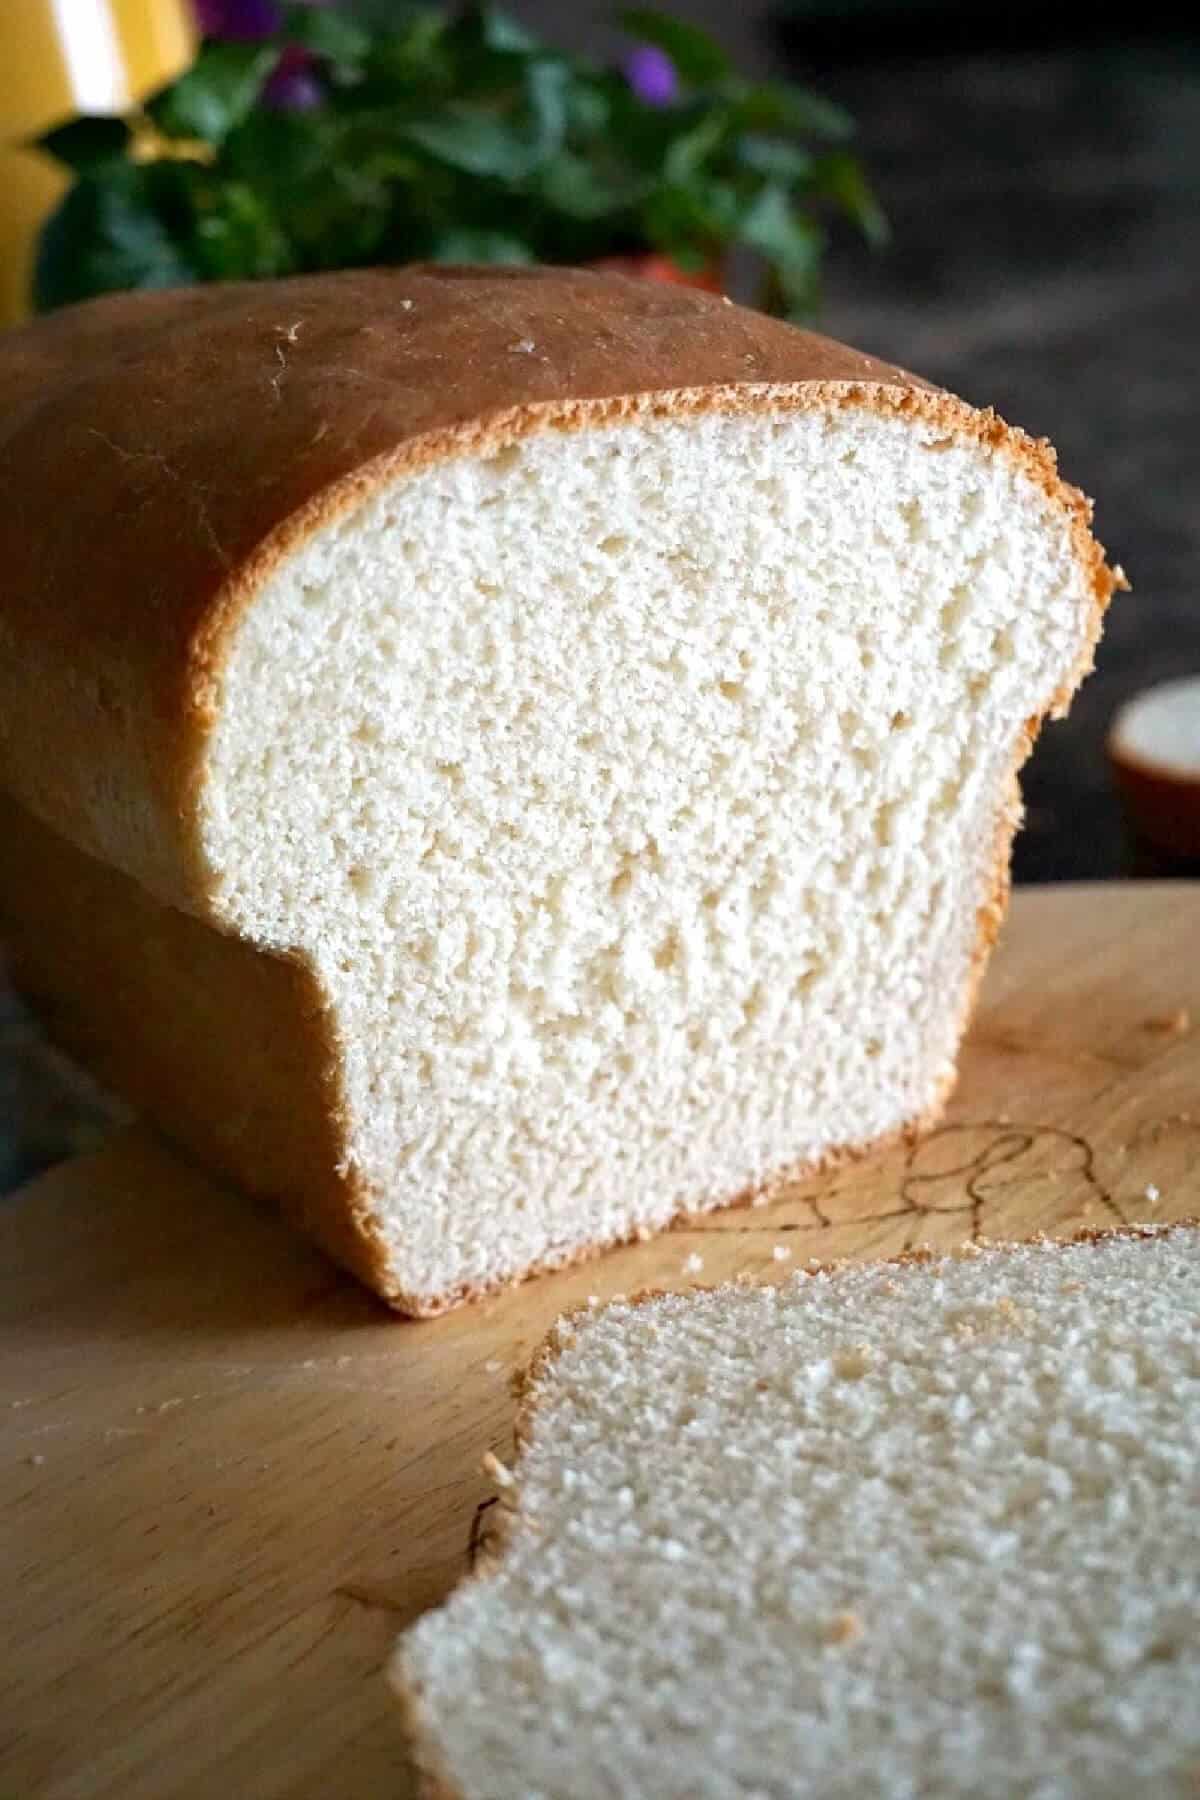 A sliced loaf of white bread.